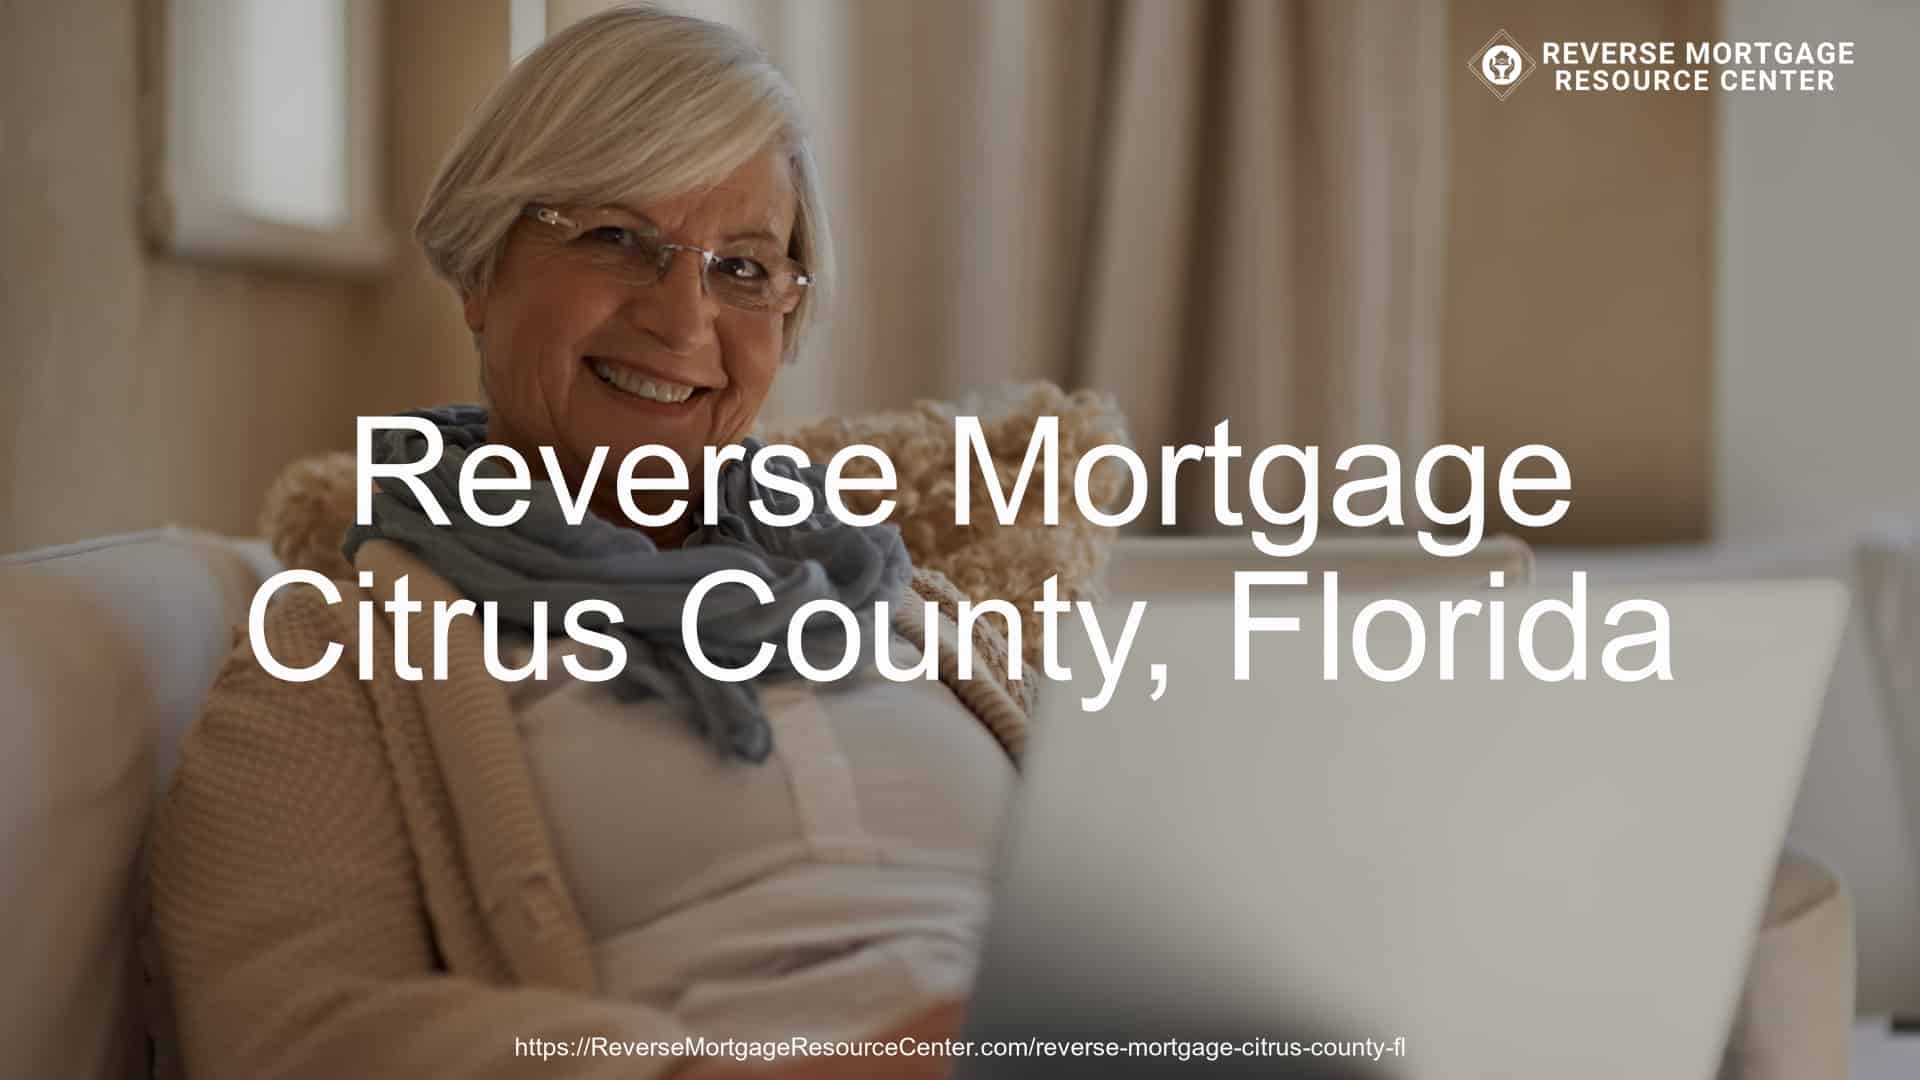 Reverse Mortgage Loans in Citrus County Florida